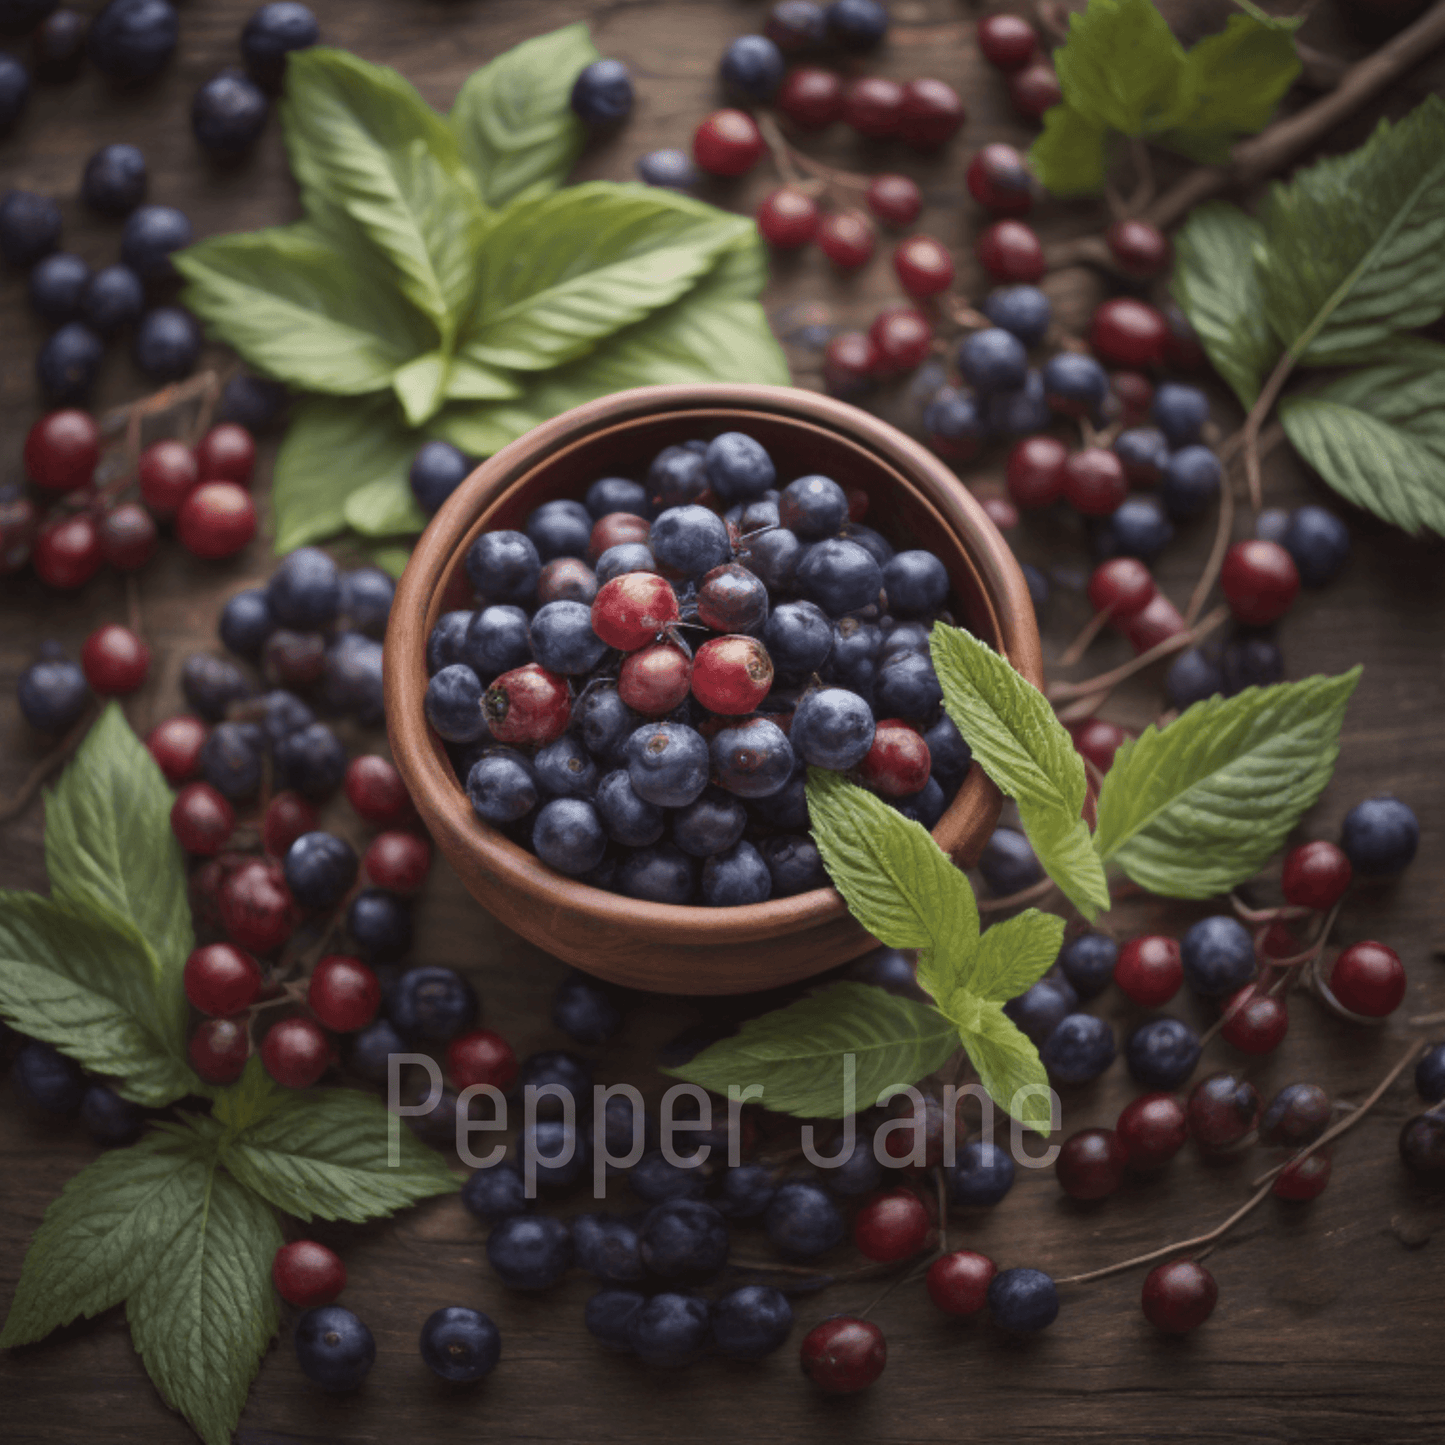 Huckleberry Fragrance Oil - Pepper Jane's Colors and Scents